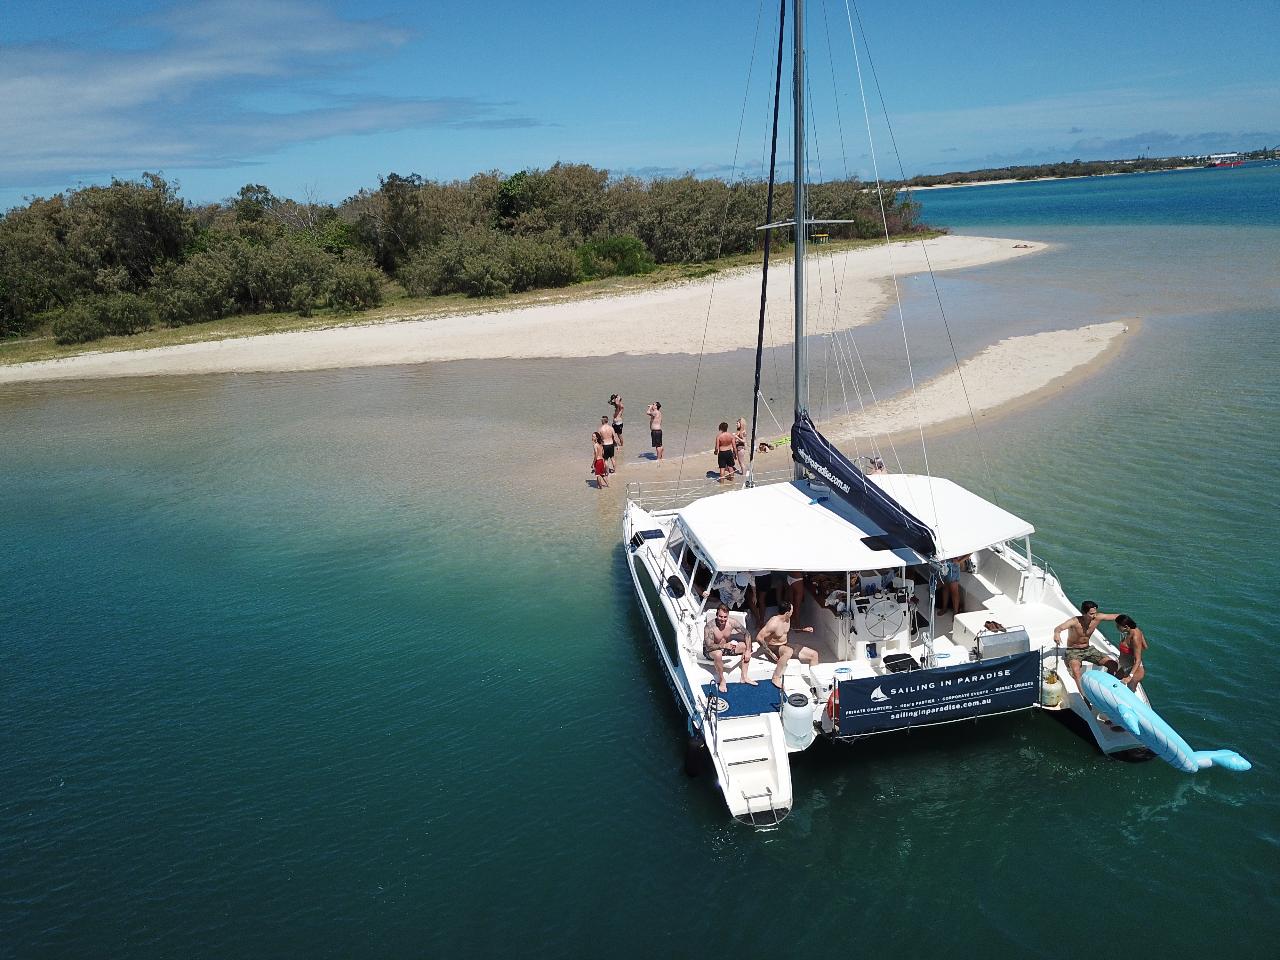 Full Day Christmas Party Charter on 'Spirit of Gwonda' (up to 30 guests)